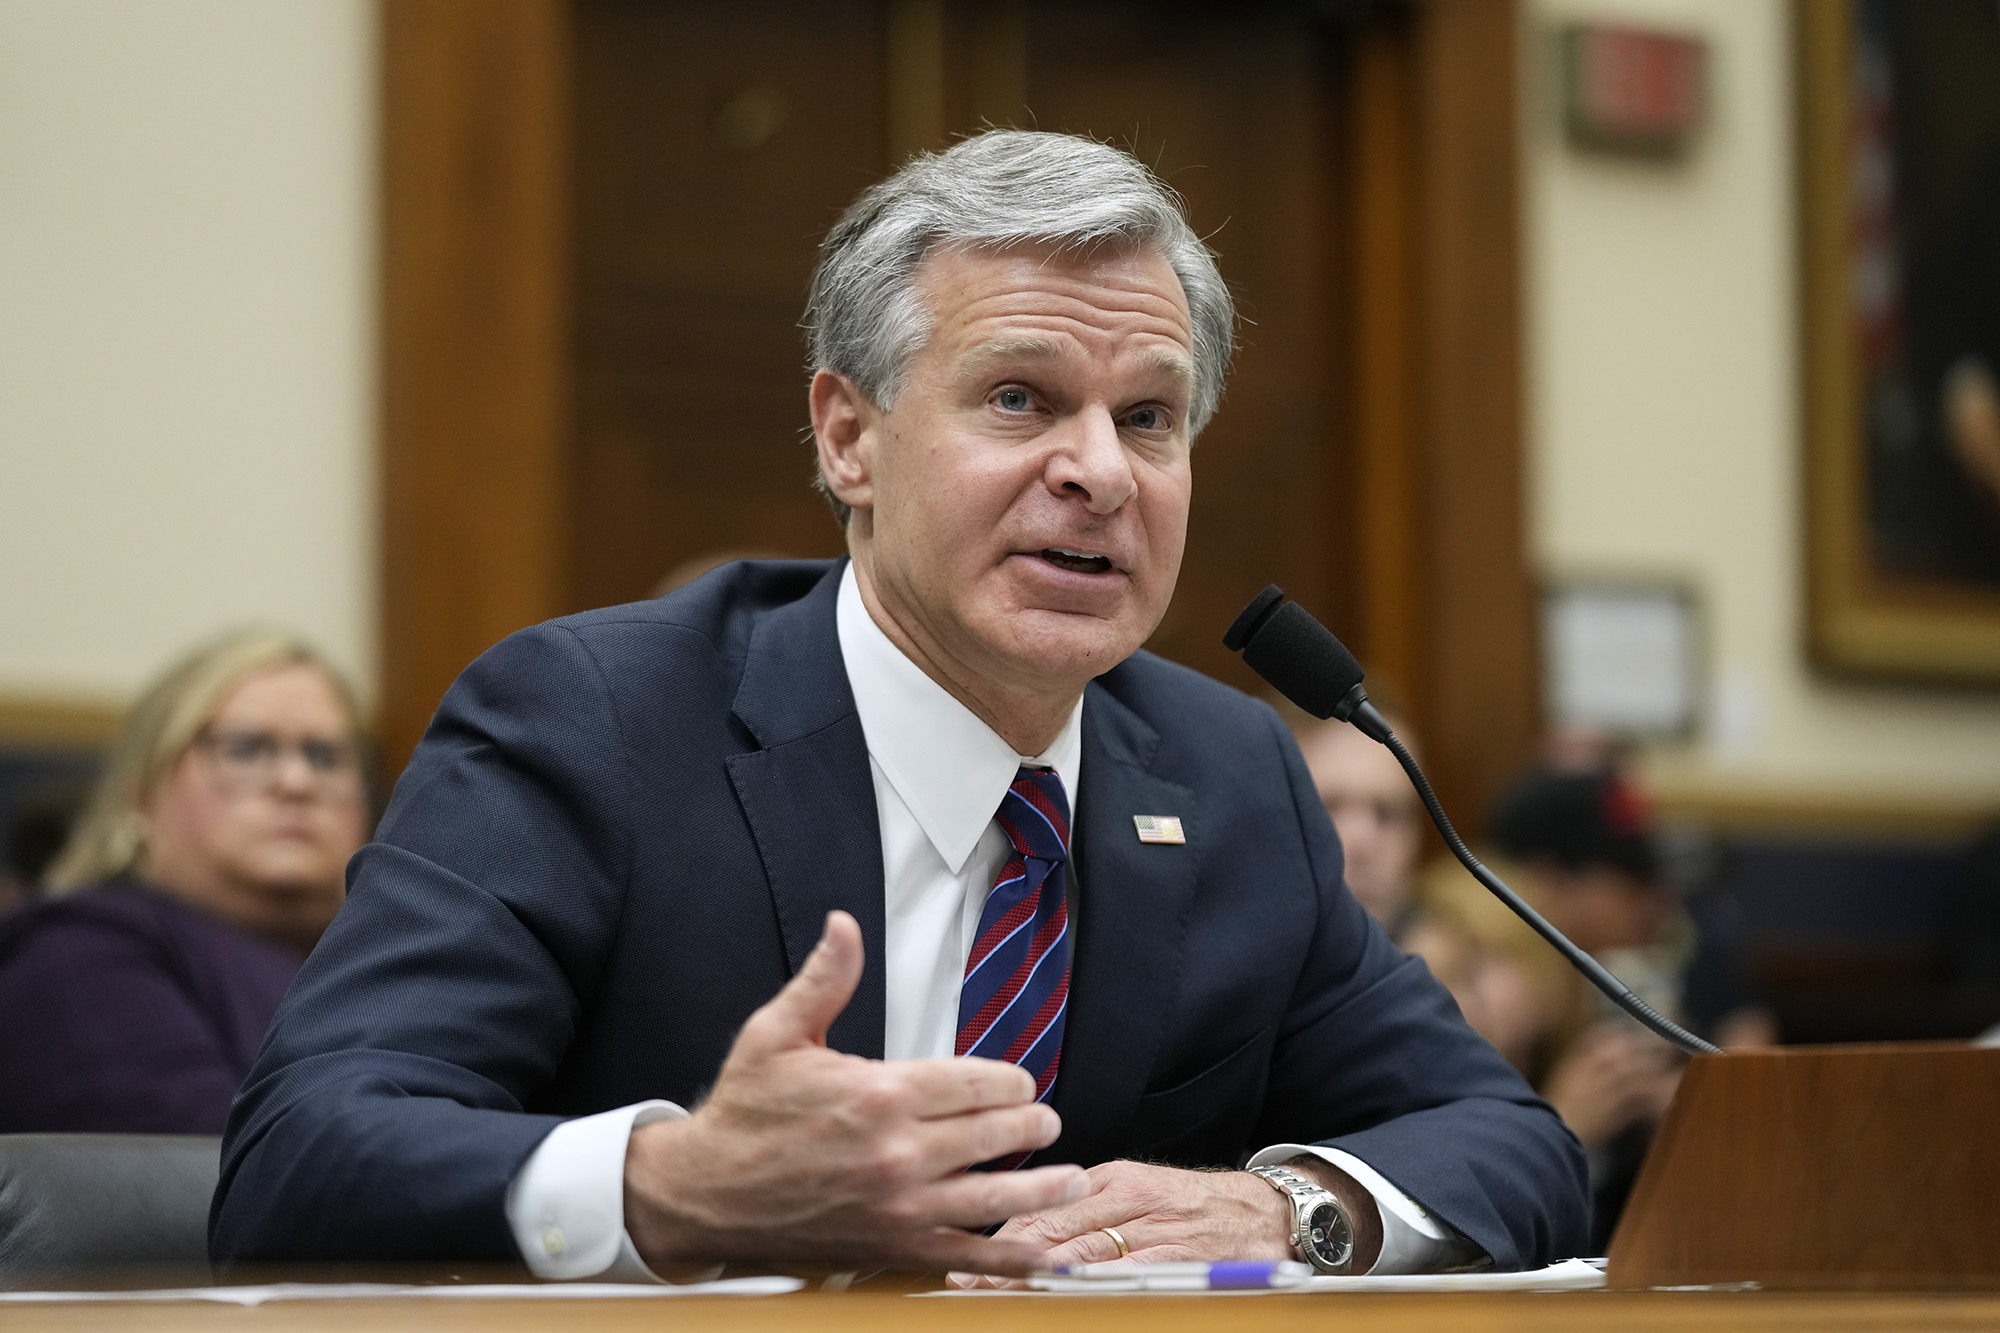 FBI Director Christopher Wray testifies before a House Committee on the Judiciary oversight hearing on Capitol Hill in Washington, on July 12.